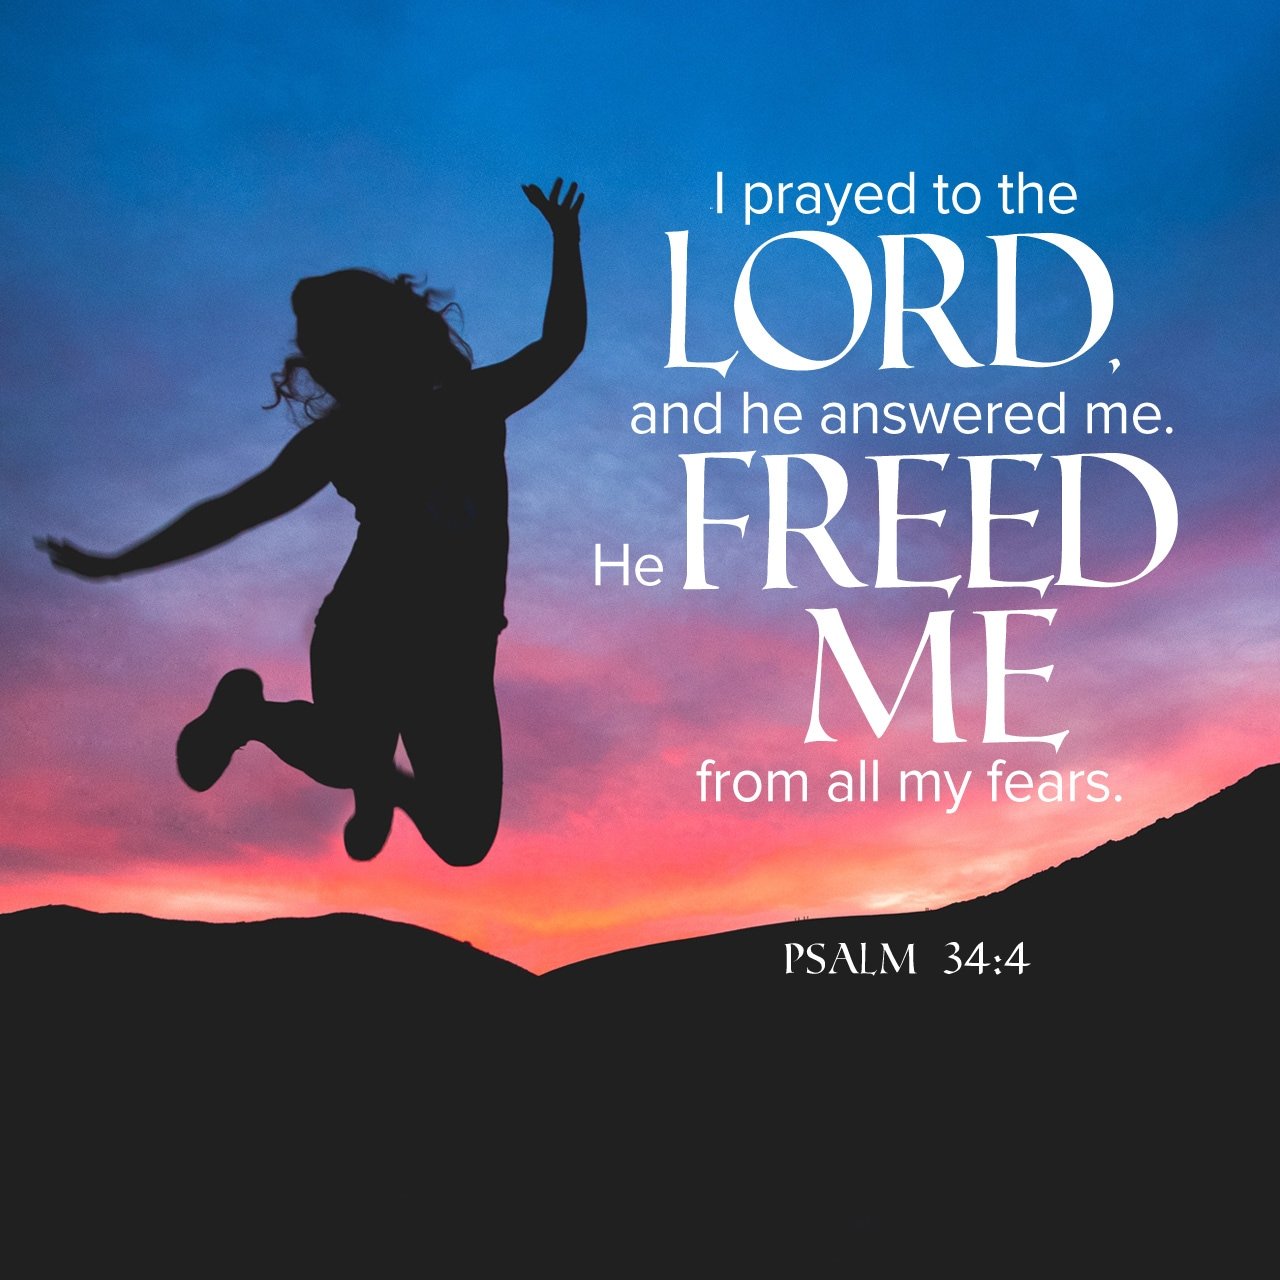 prayed to the LORD and he answered me: He FREED ME from all my fears; PSALM 34.4